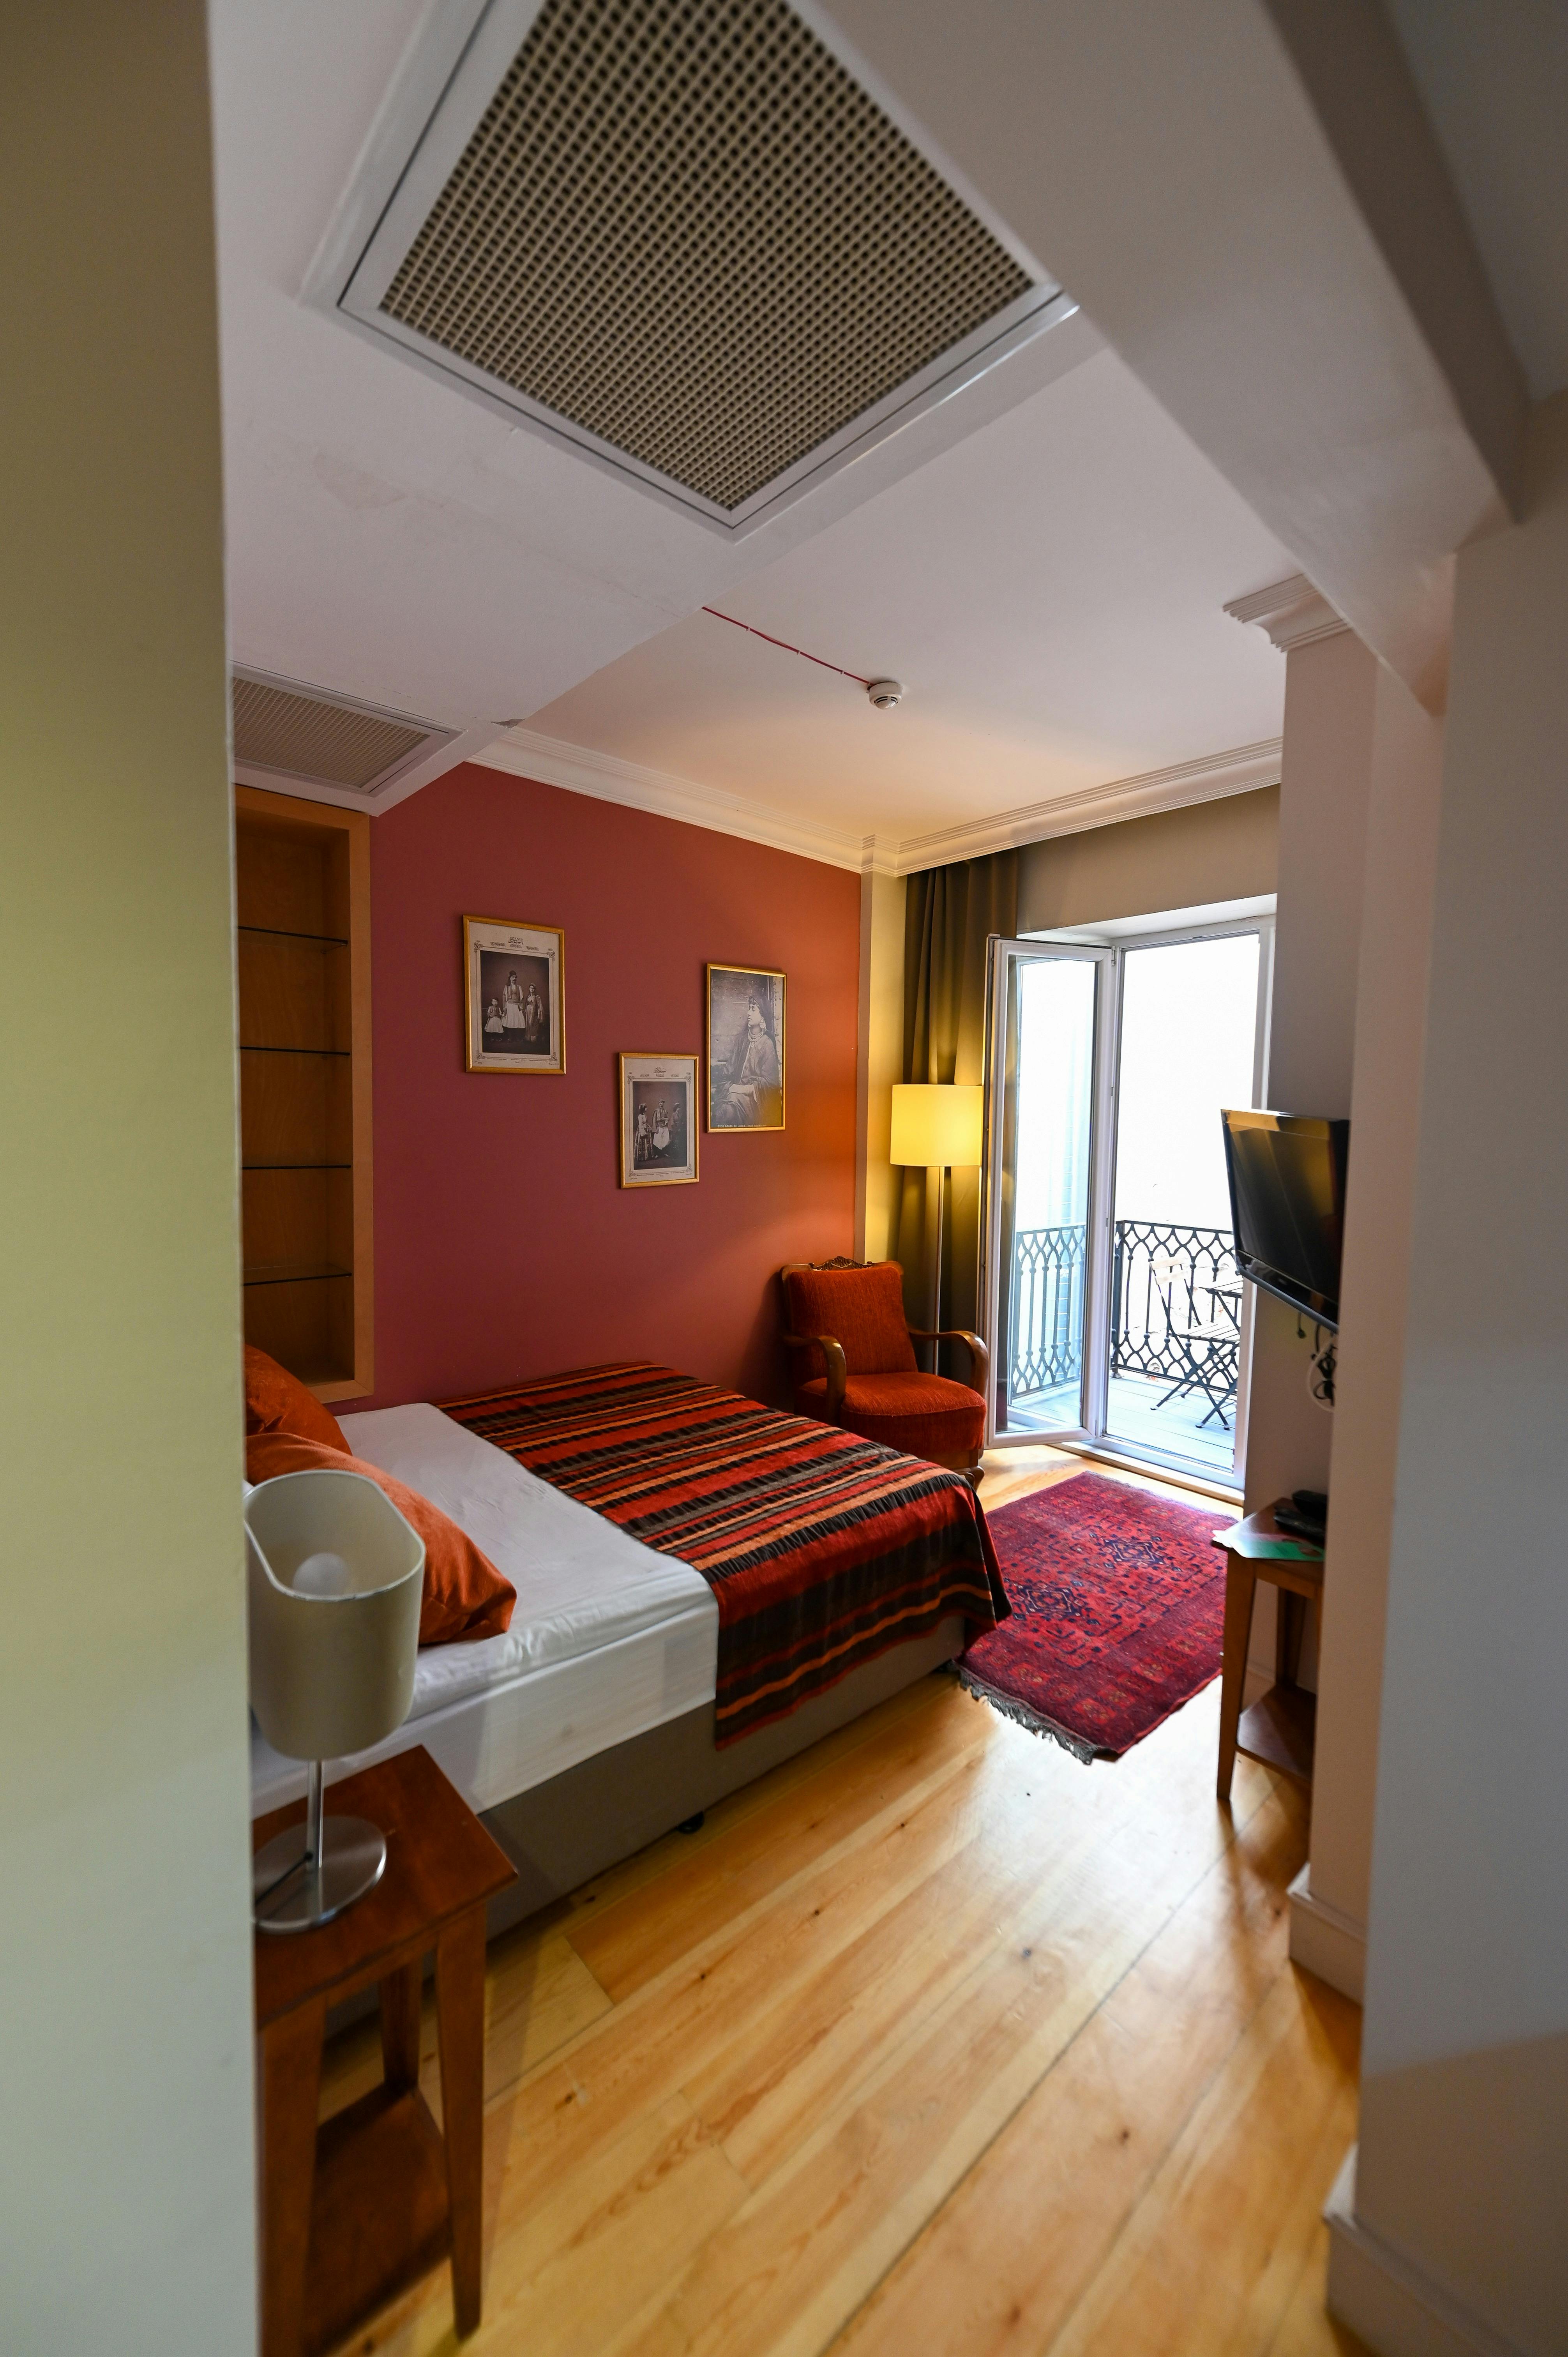 No11 Hotel, double or twin room with balcony